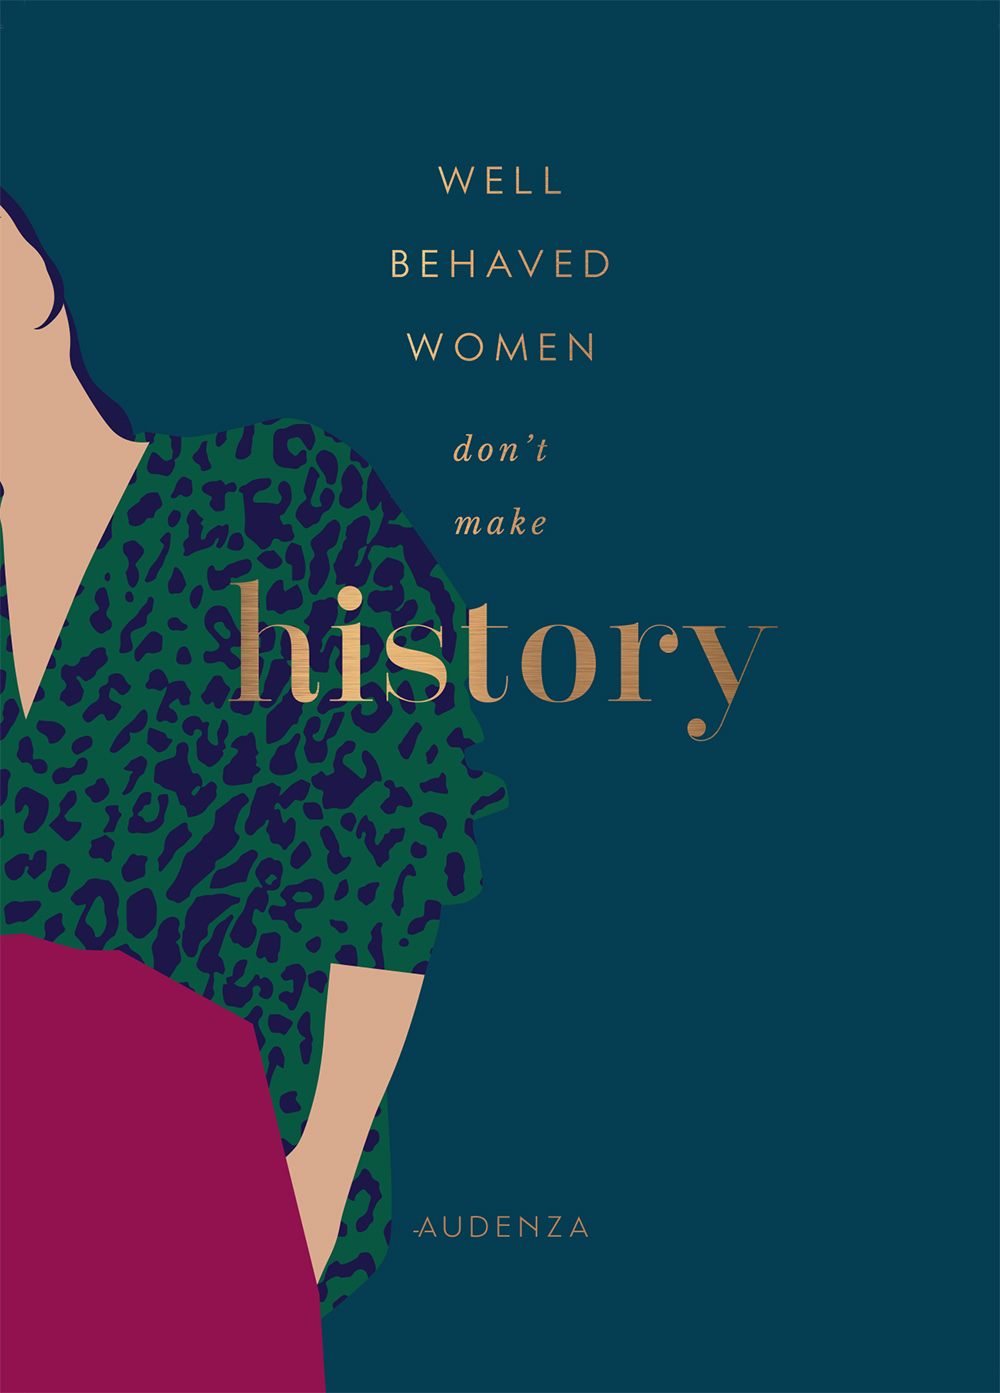 Well behaved women don't make history quote